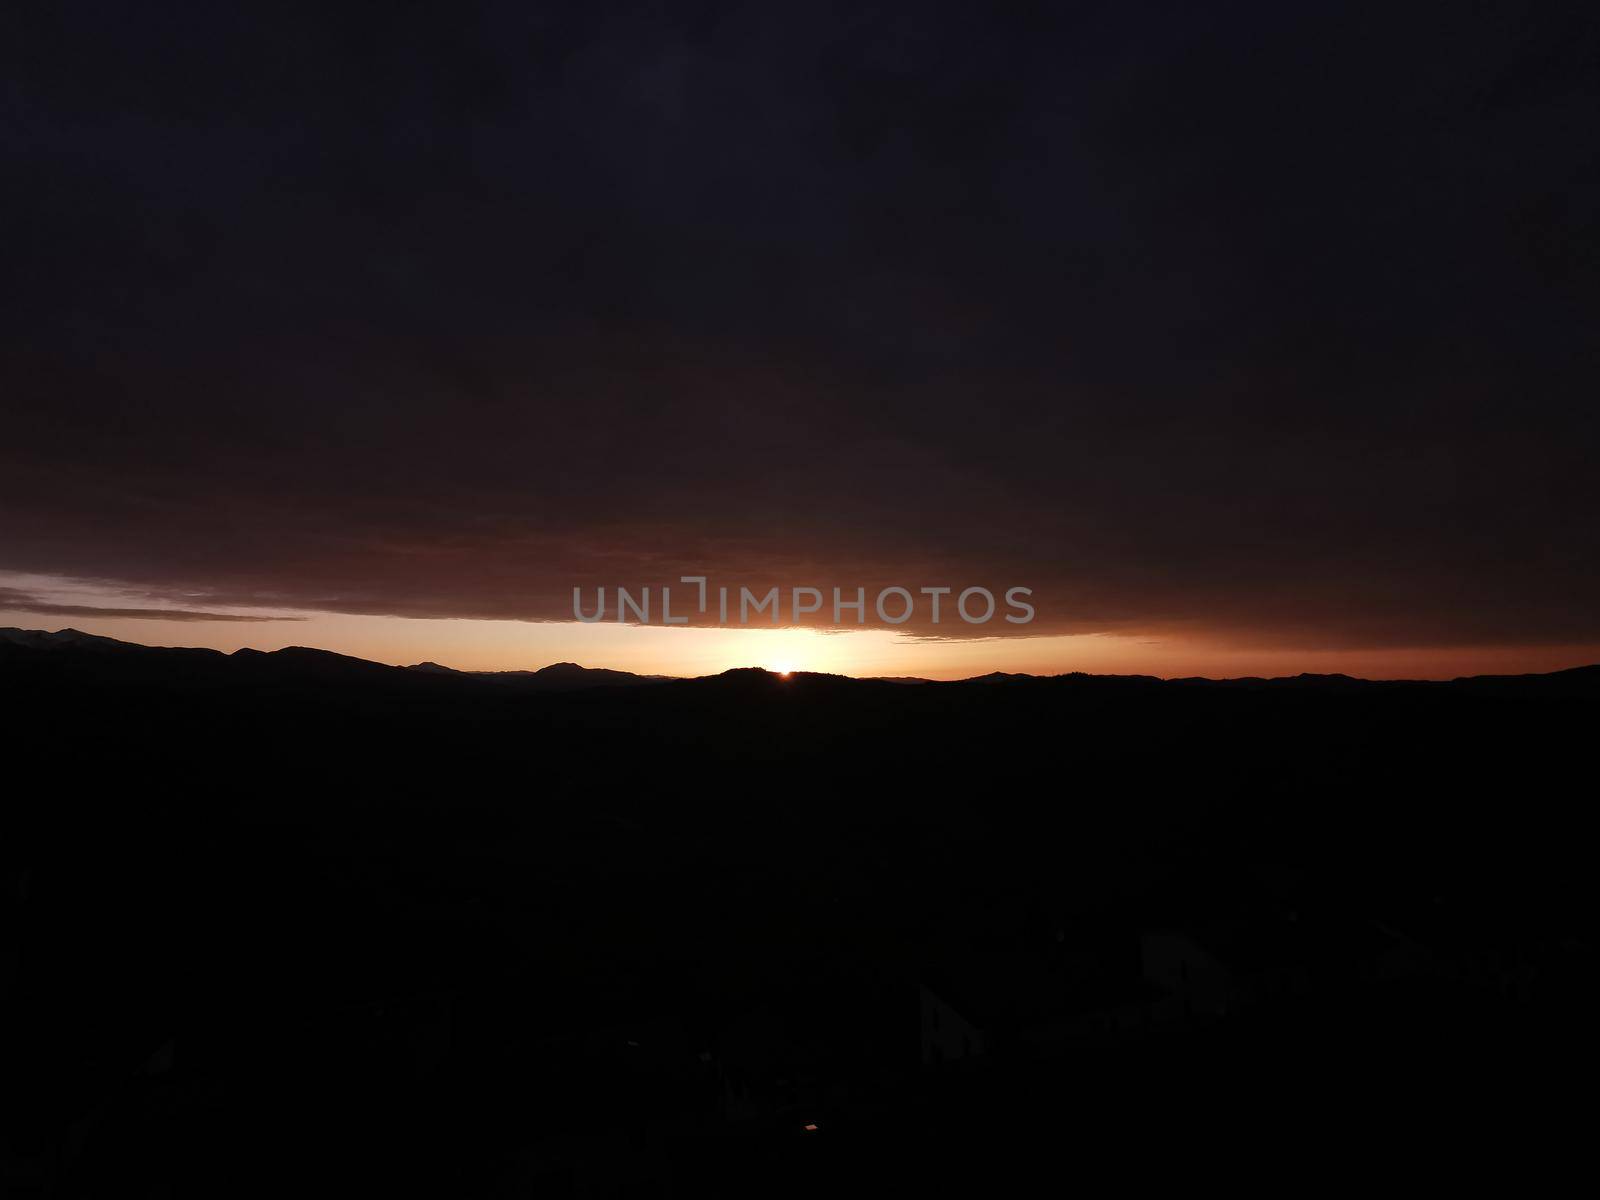 panorama of the sunset from the castle of MonteFiorino Modena on the hills. High quality photo